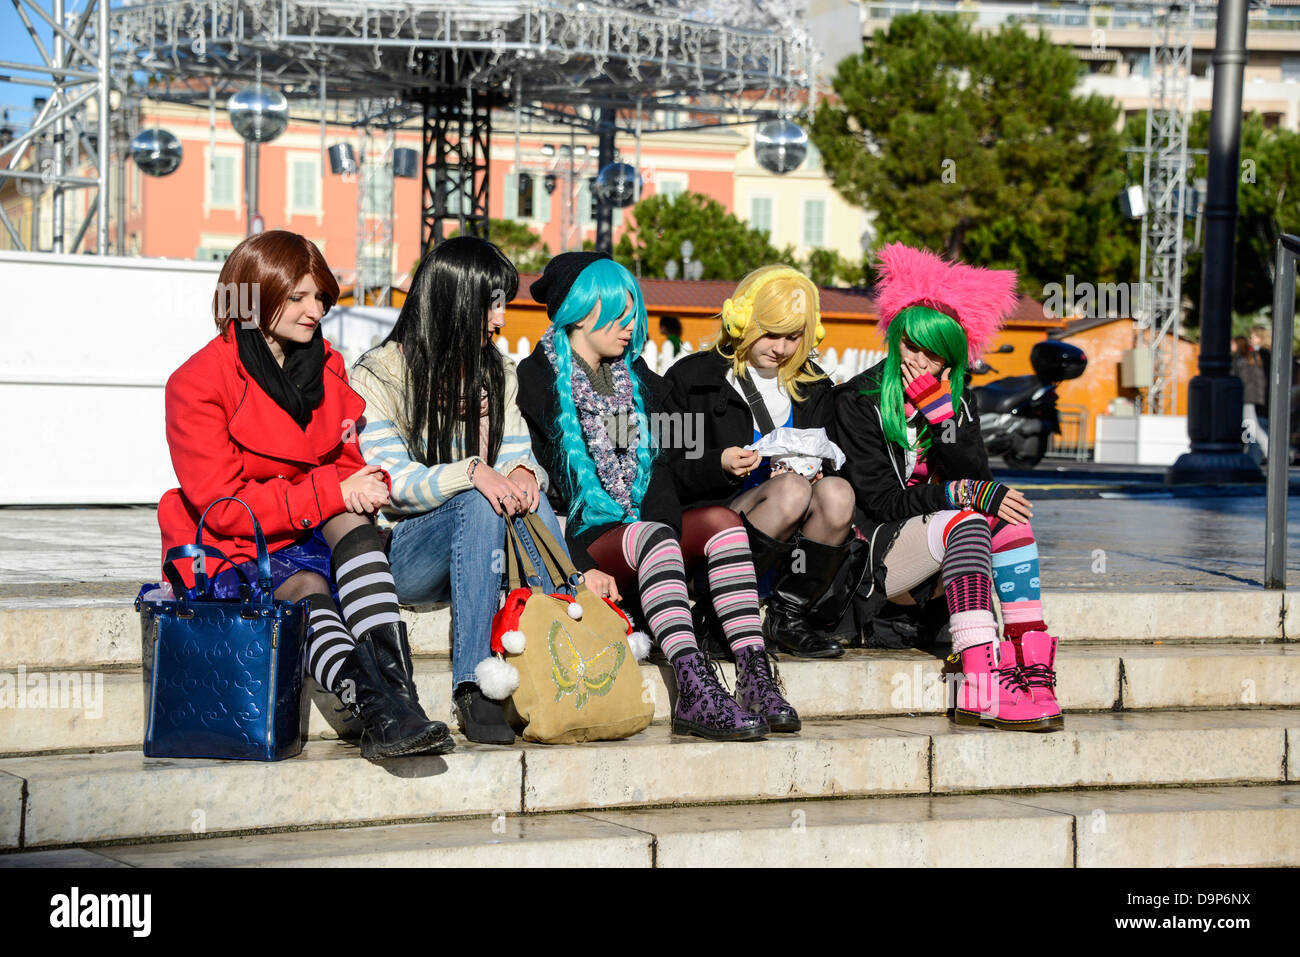 Young girls dressed up as punk rockers with multi colored wigs in Nice France Stock Photo